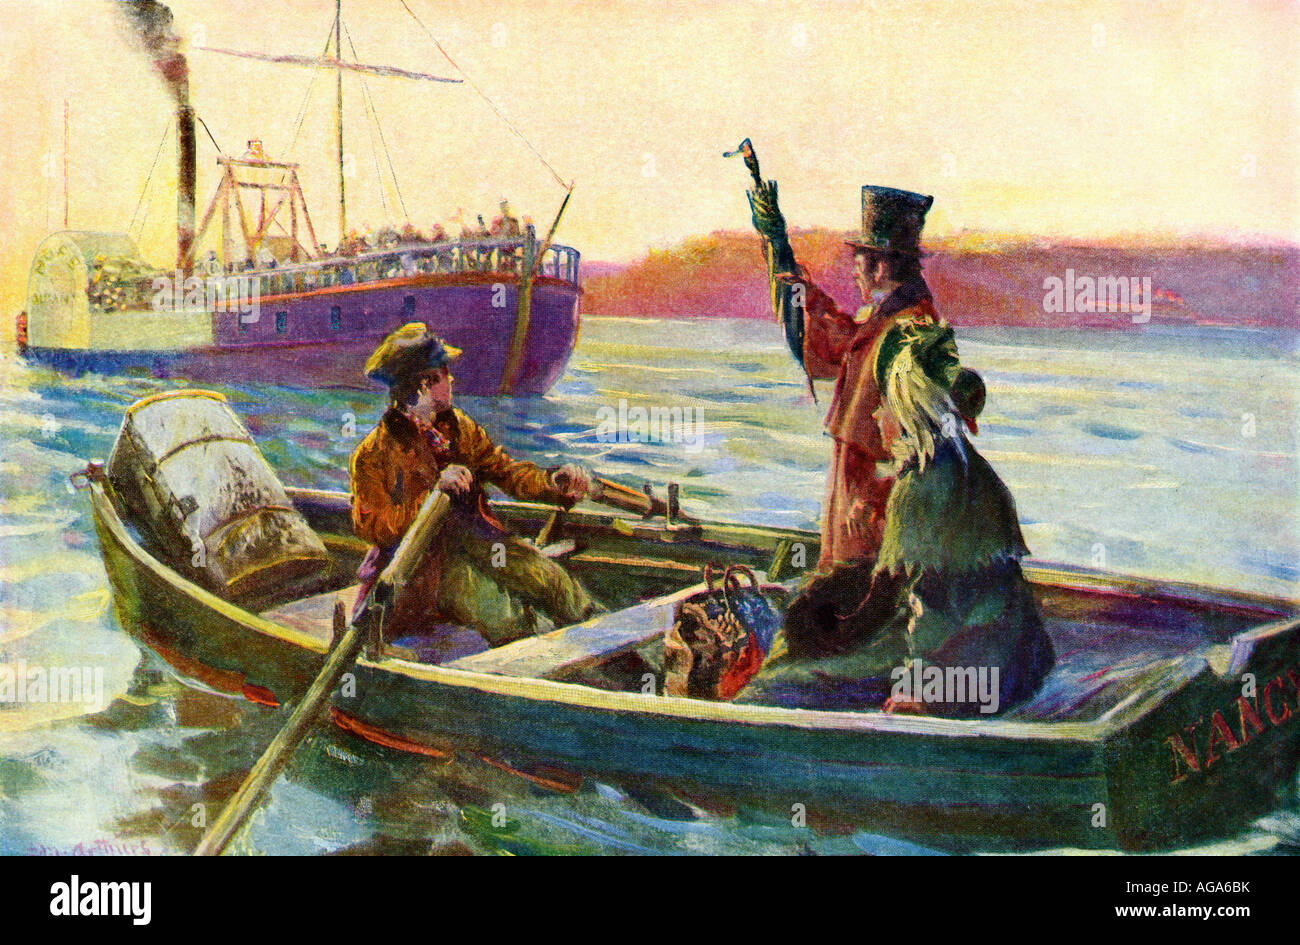 Passengers hailing a riverboat to board from a rowboat in mid-stream early 1800s. Color halftone of an illustration Stock Photo